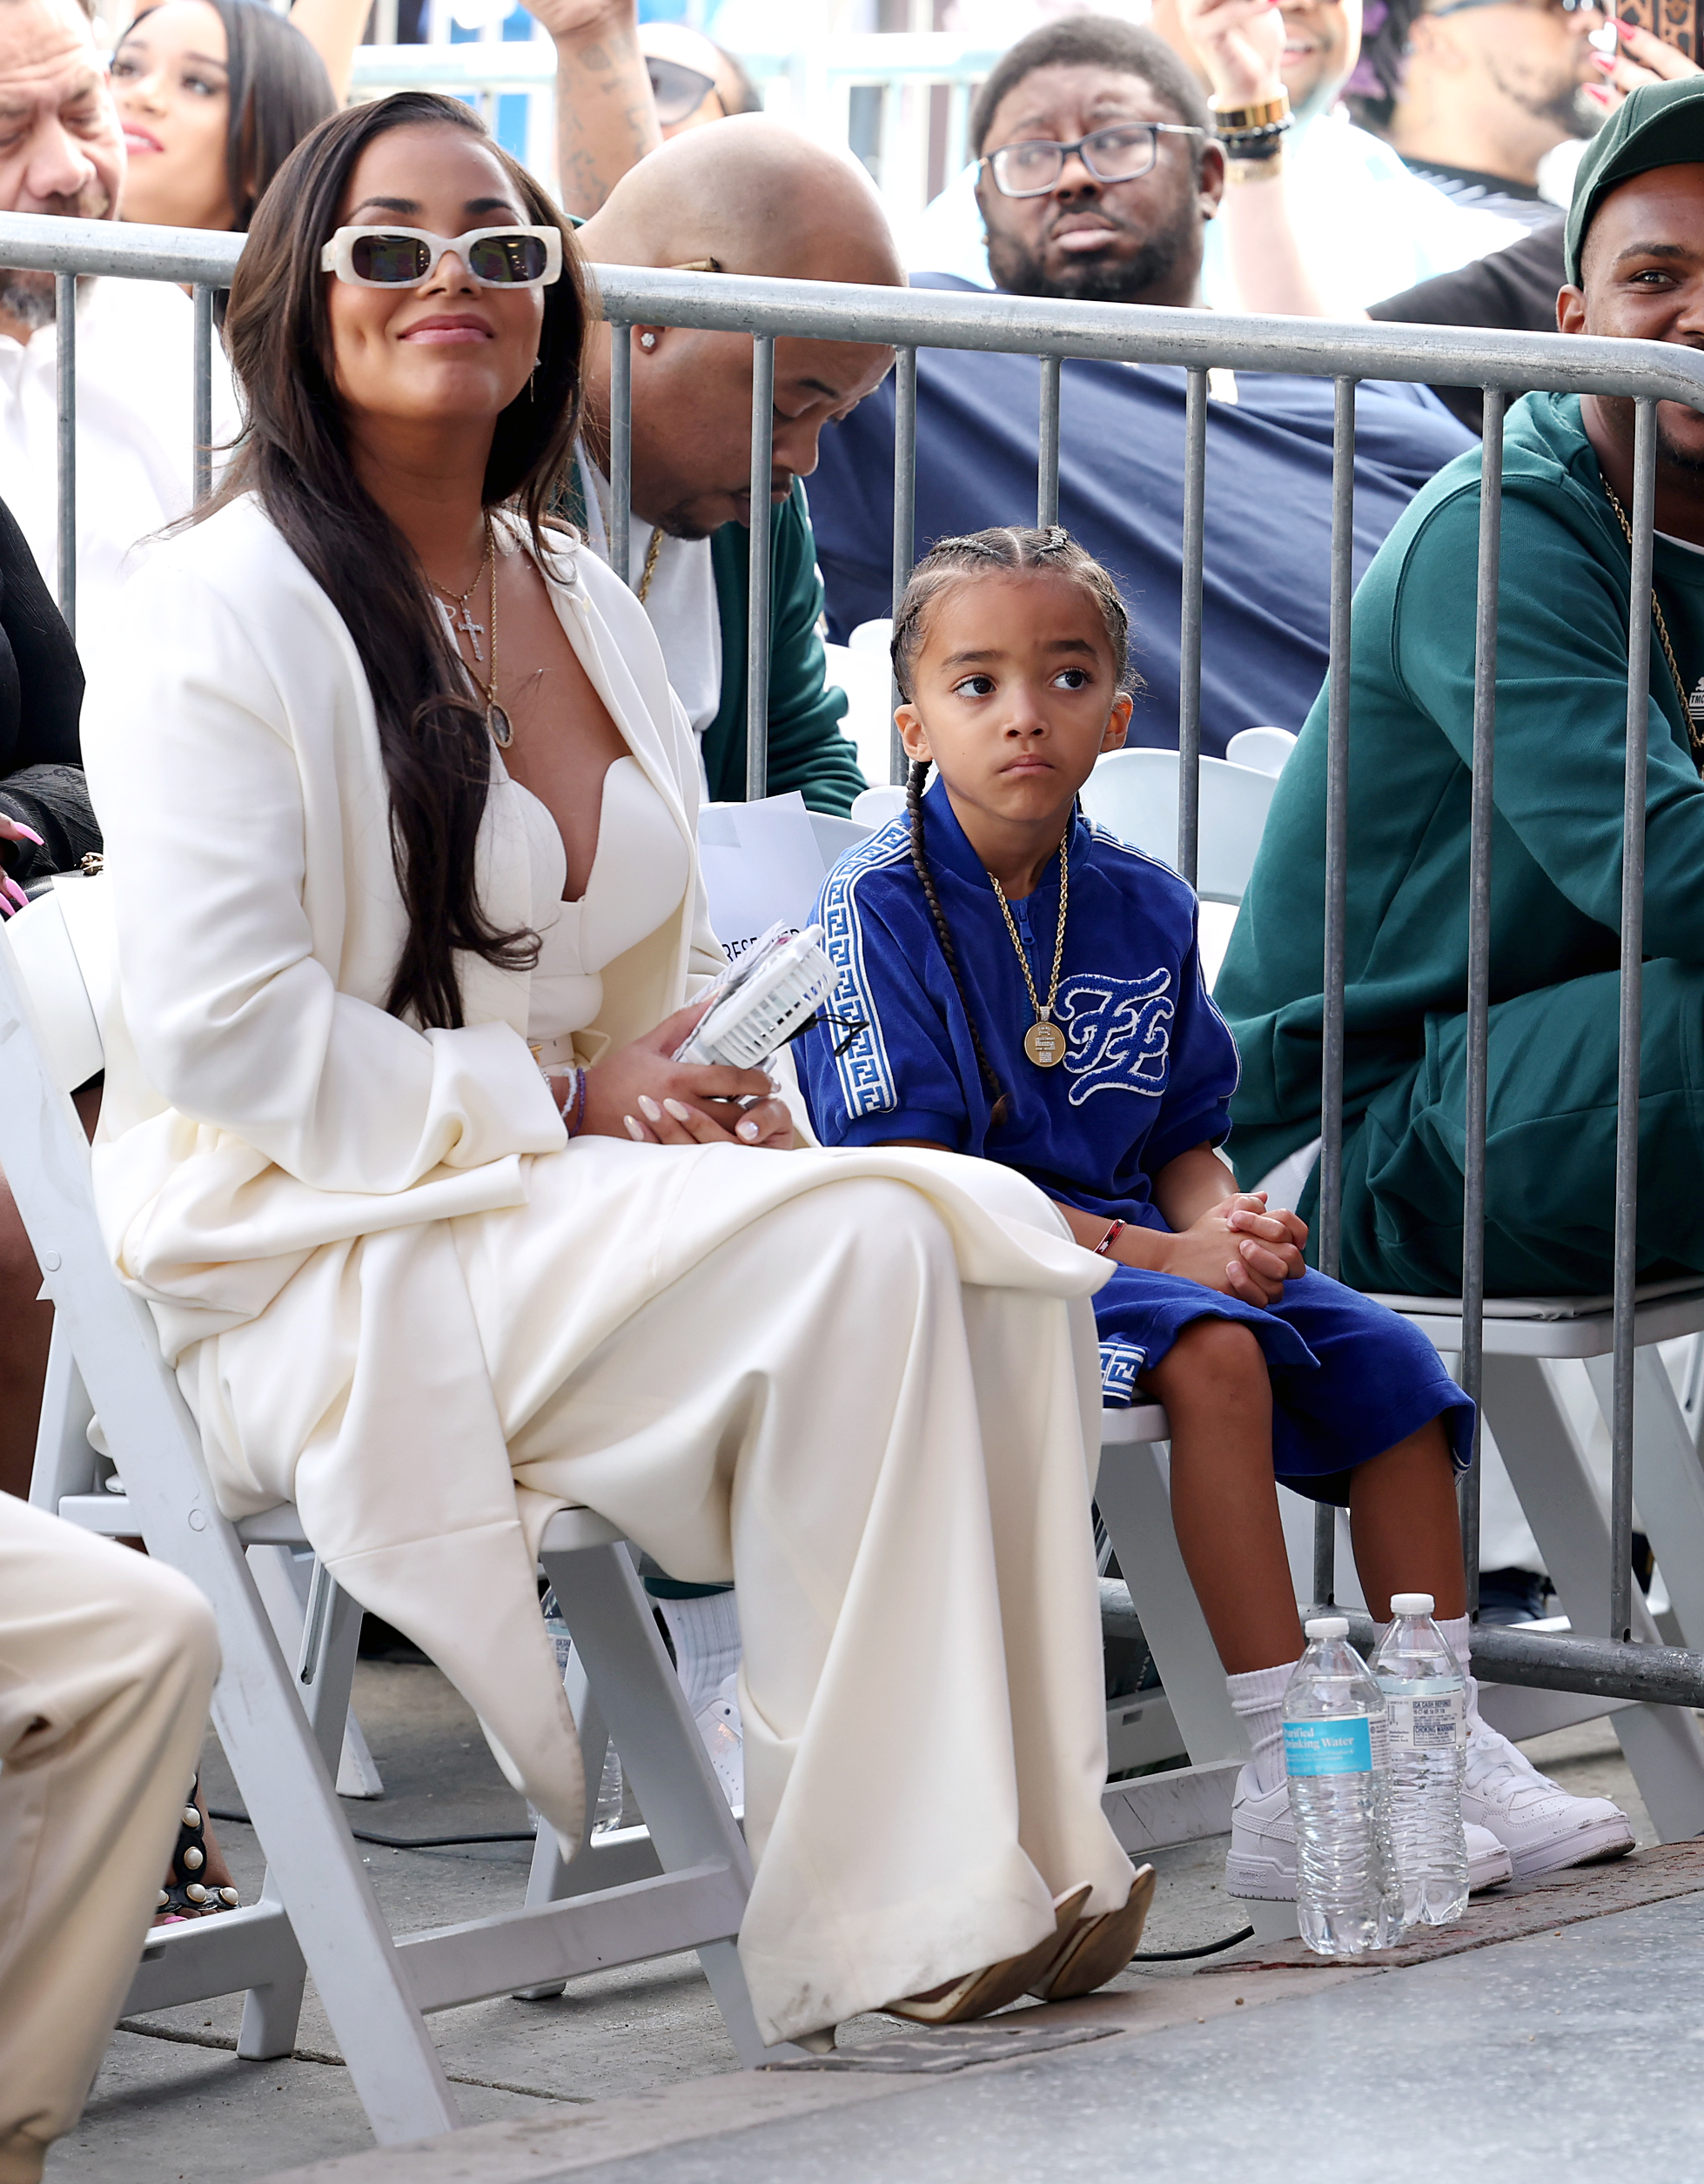 (L-R) Lauren London and Kross Ermias Asghedom are seen as Nipsey Hussle is posthumously honored with a star on The Hollywood Walk of Fame on Aug. 15, 2022, in Los Angeles, Calif.